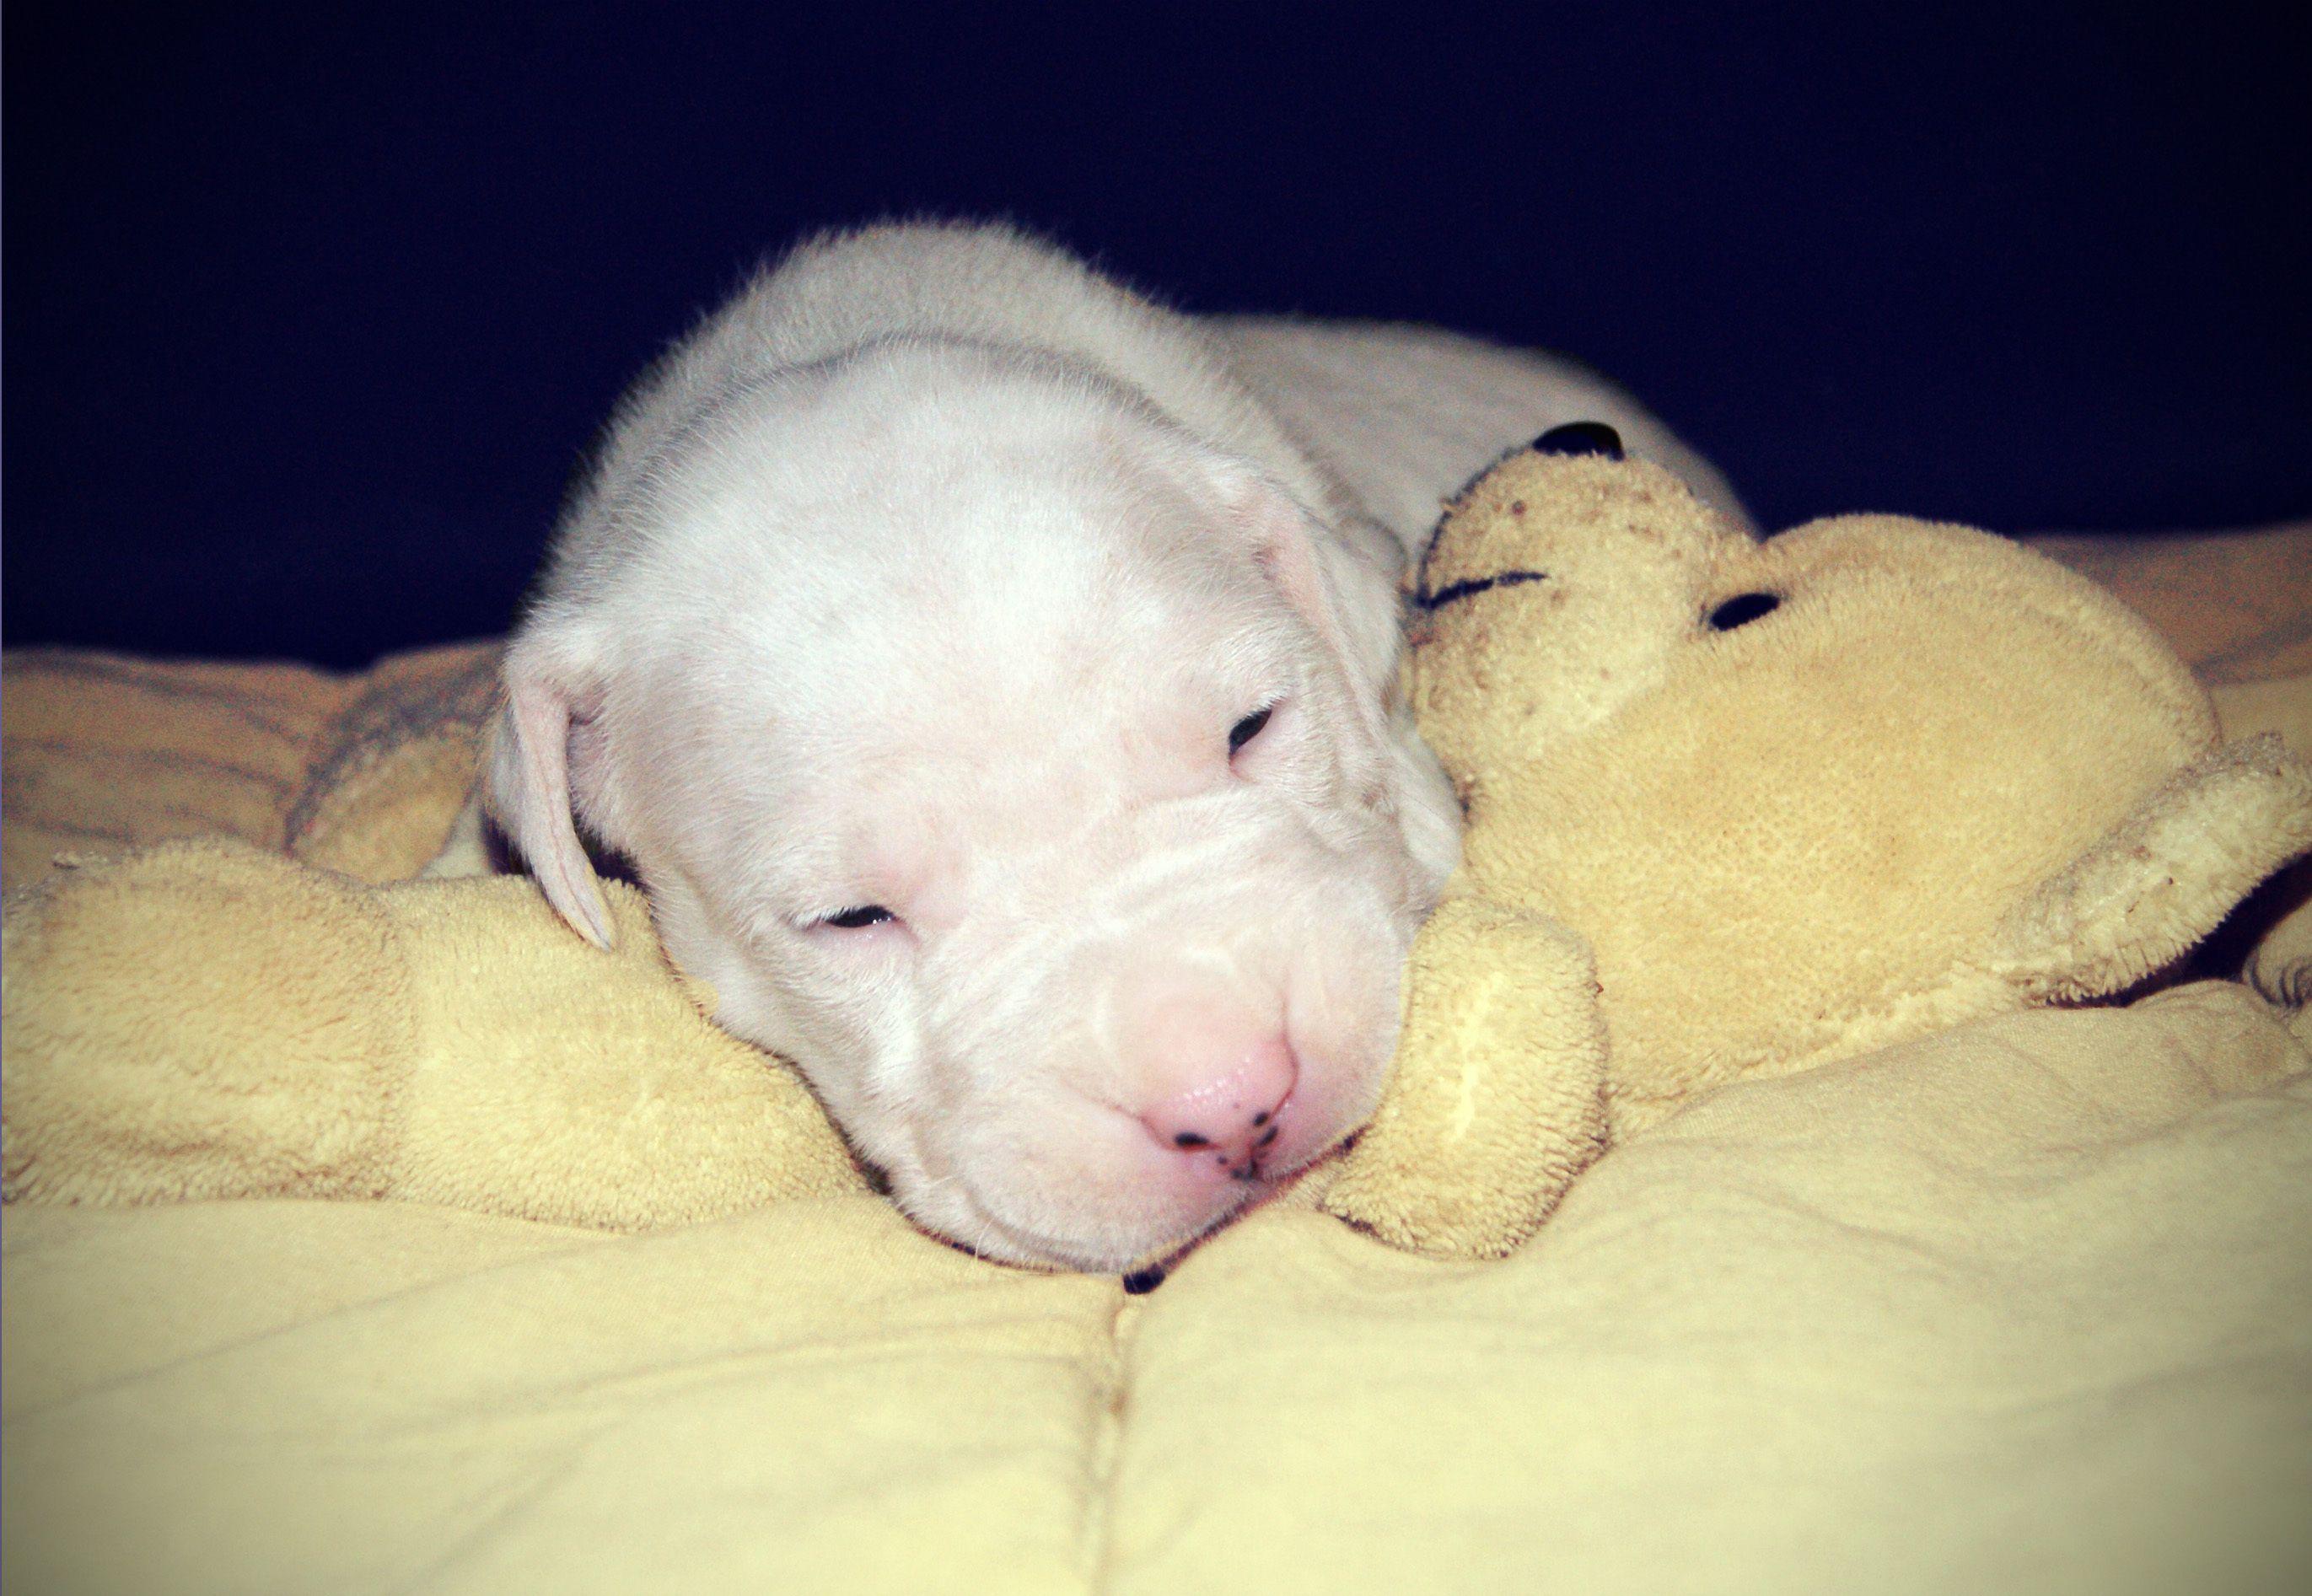 Dogo Argentino Puppy wallpaper and image, picture